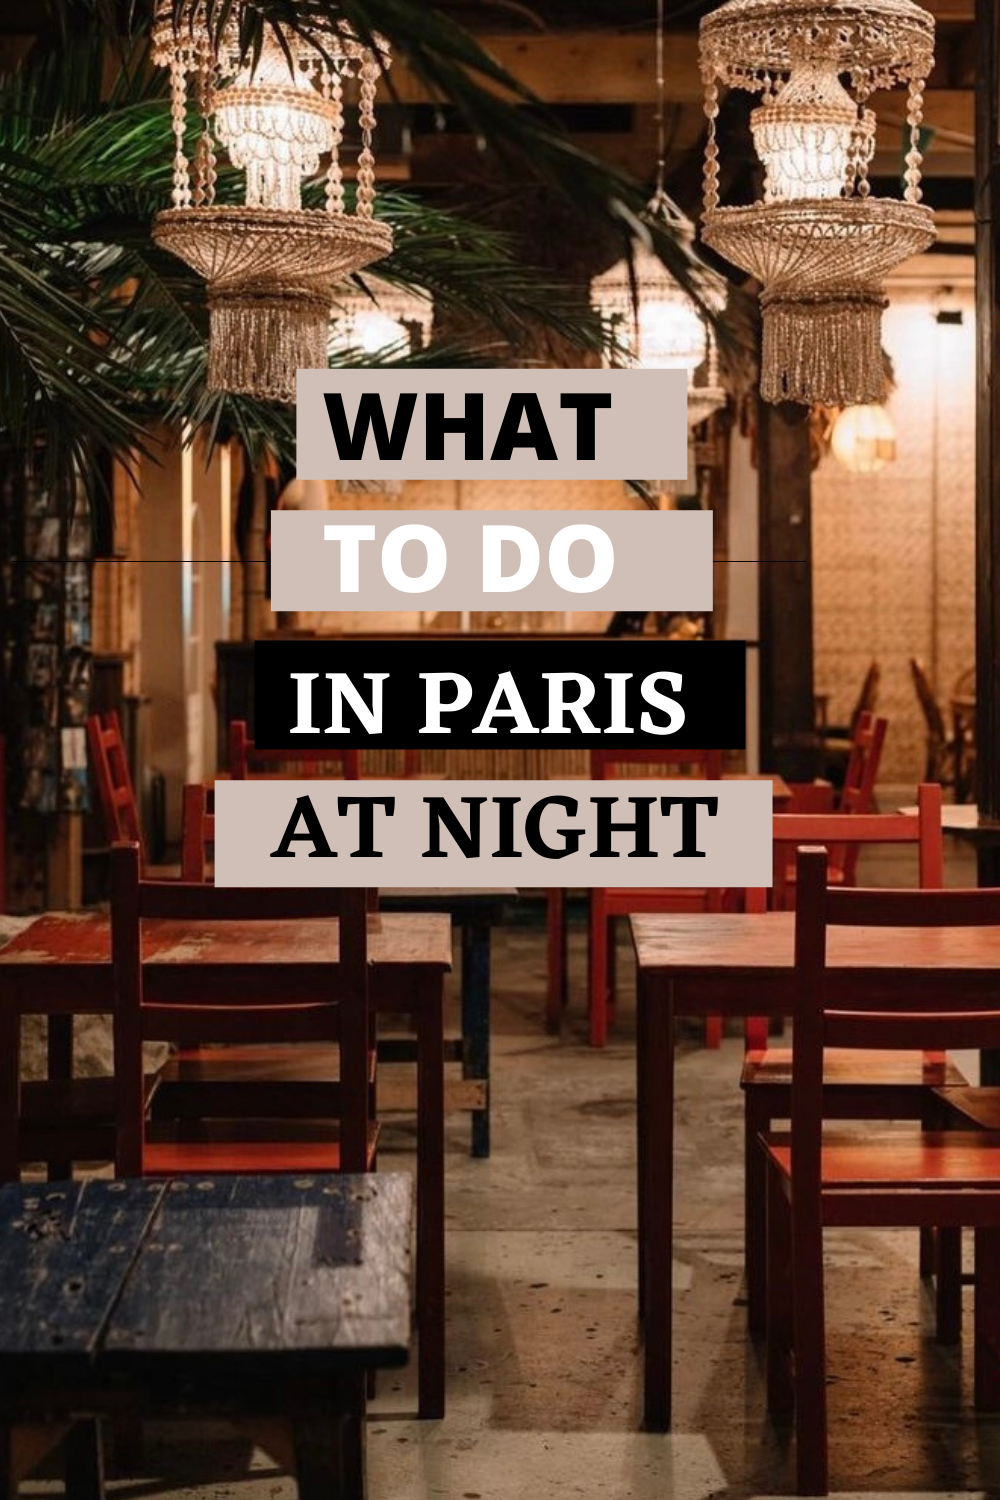 What To Do in Paris at Night